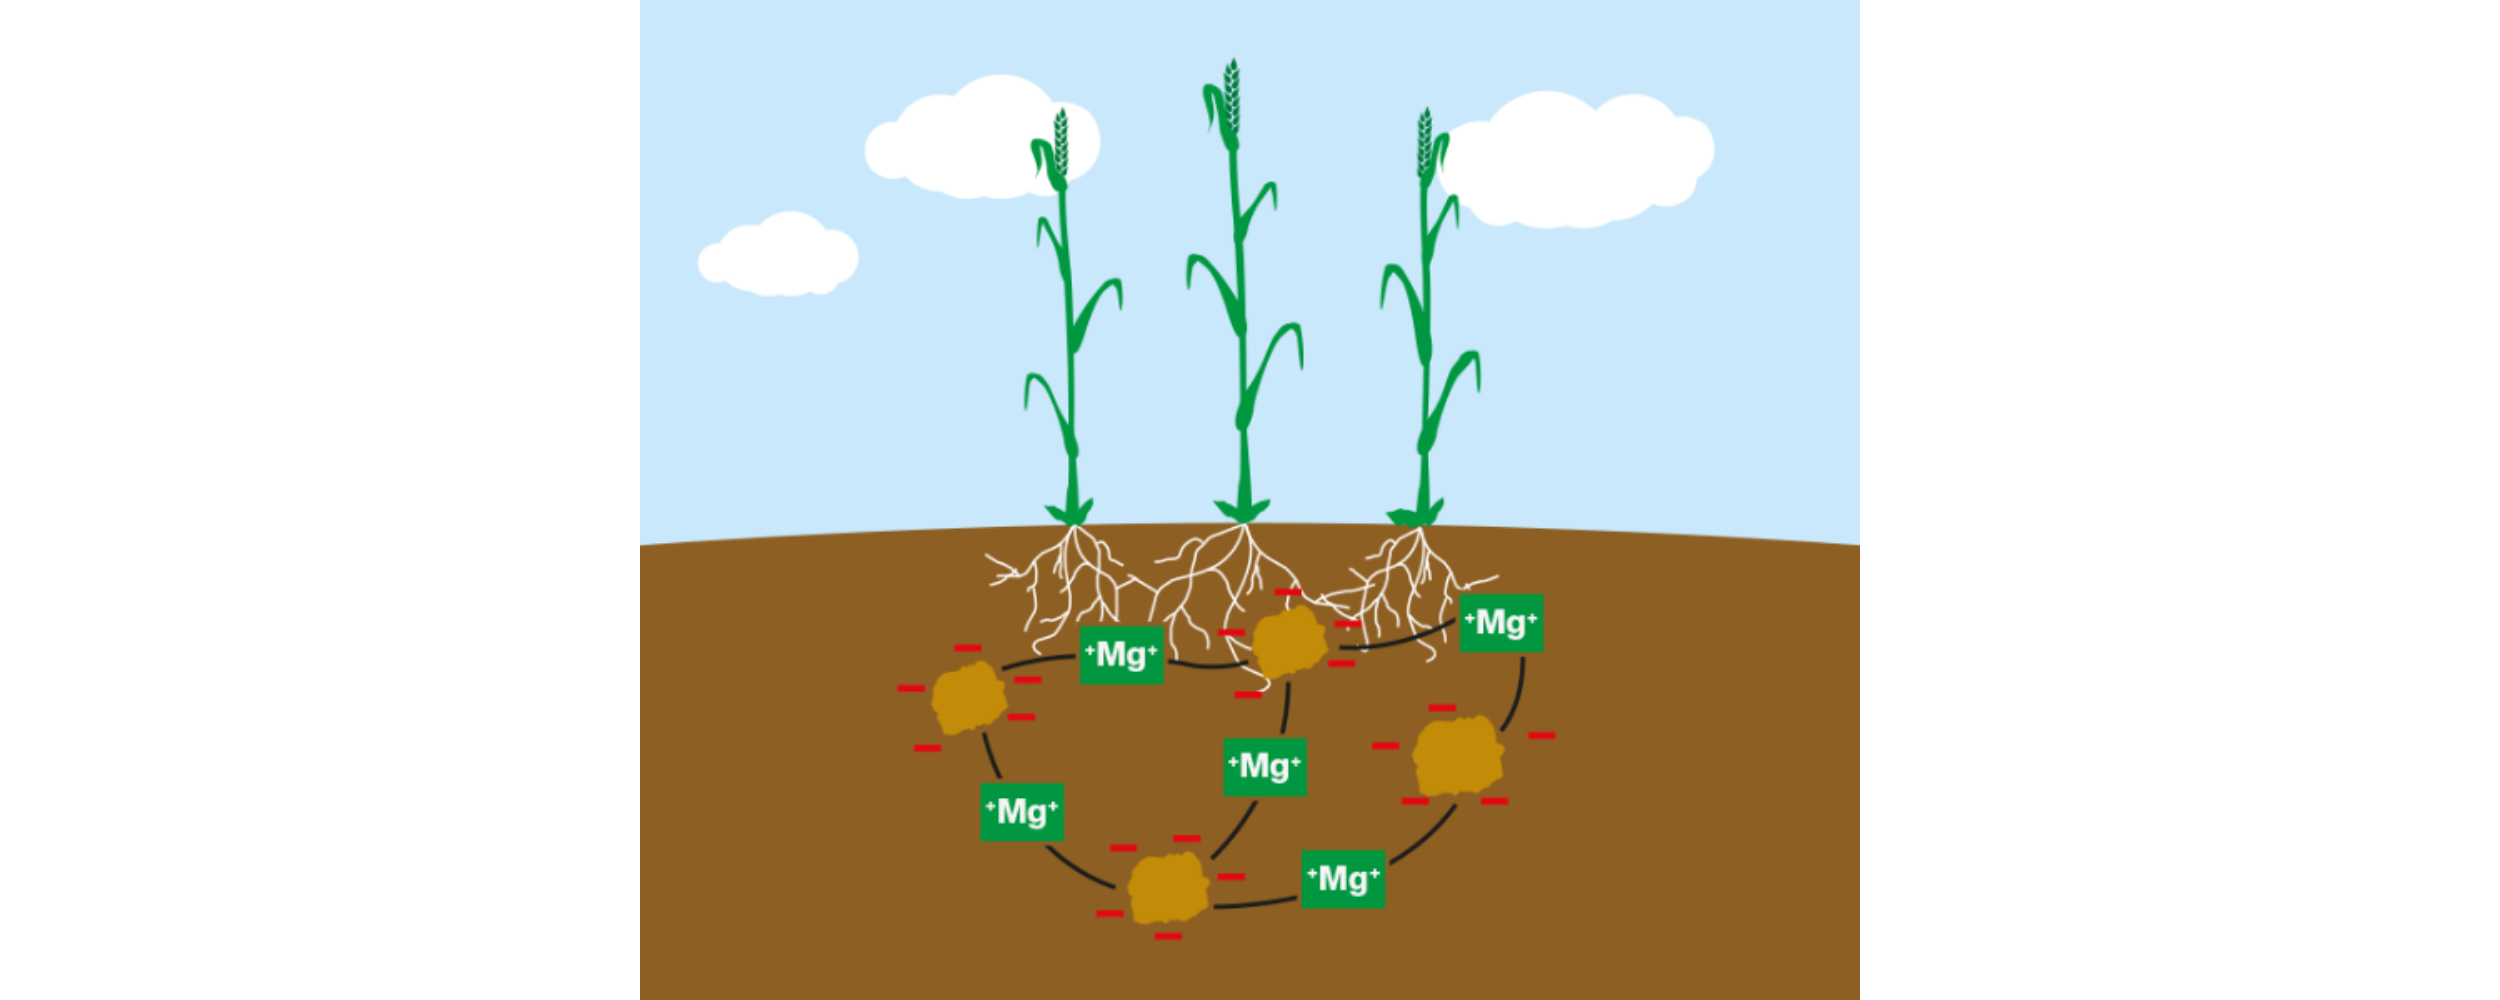 Magnesium stabilizes the soil structure